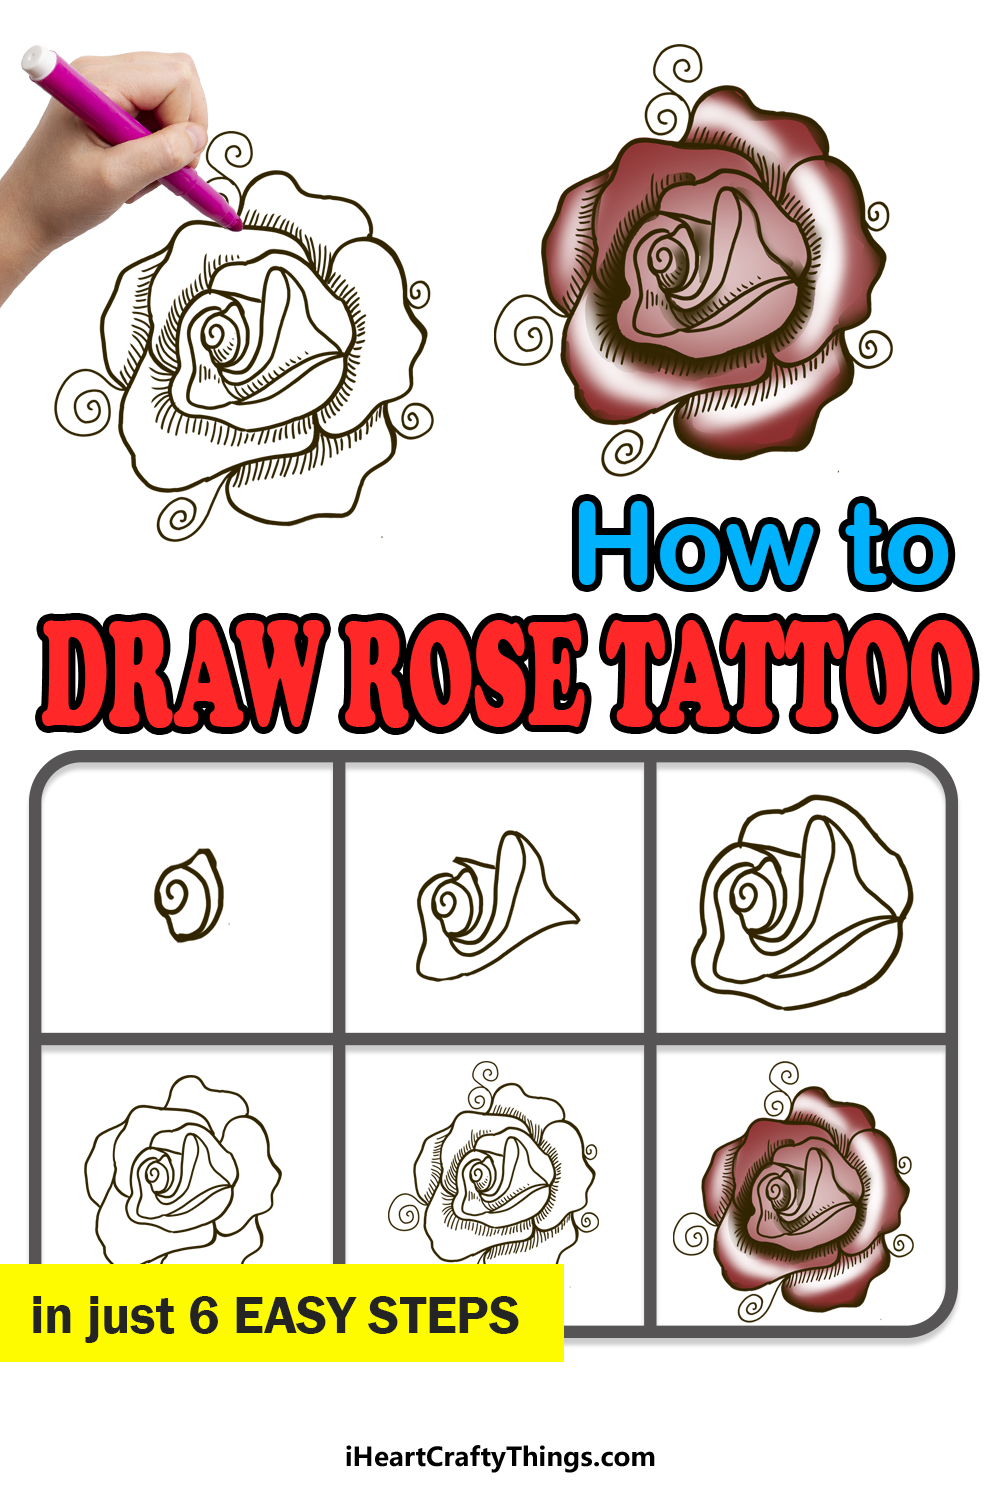 How to Draw A Rose Tattoo step by step guide